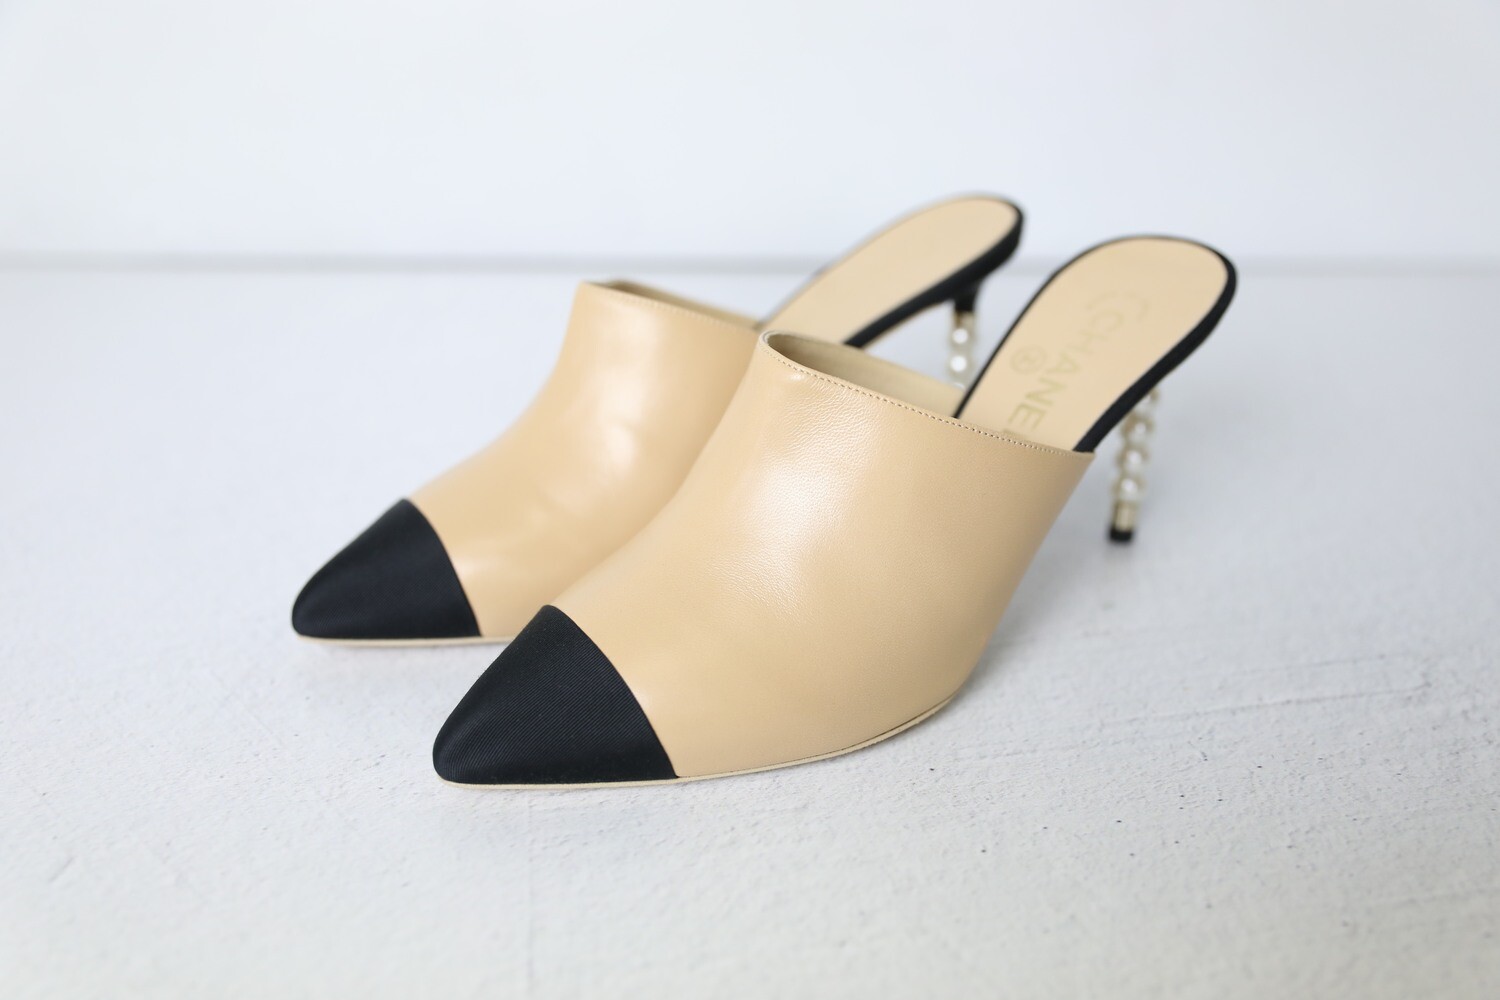 Chanel Shoes Pointed Mules with Pearl Heels, Beige and Black, Size 39, New  in Box WA001